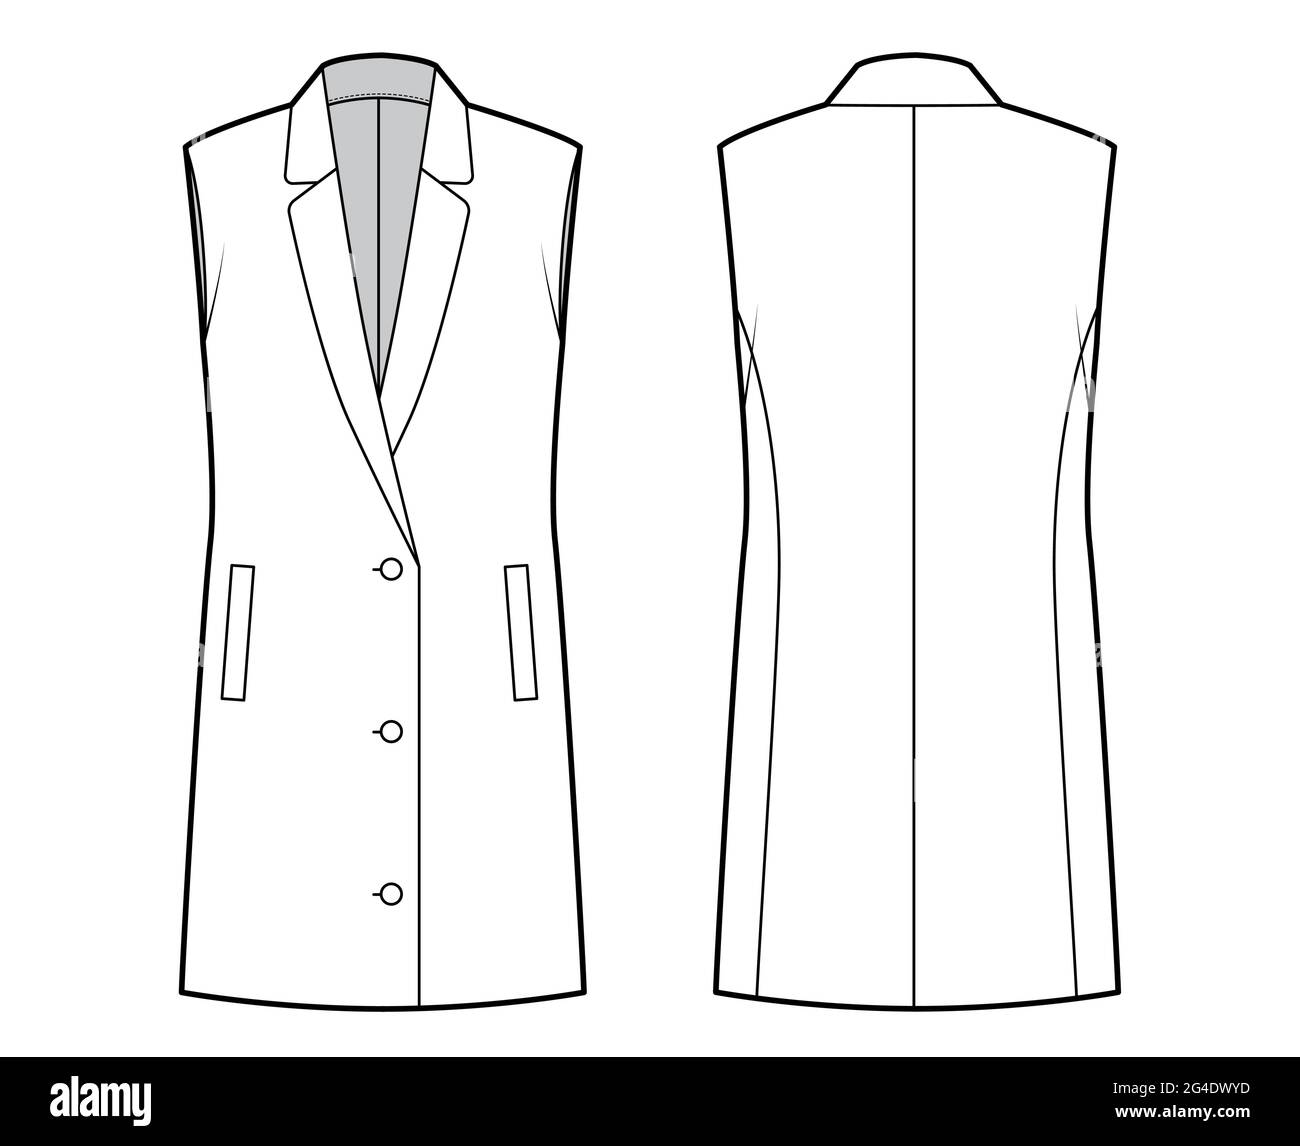 Sleeveless jacket lapelled vest waistcoat technical fashion illustration with button-up closure, pockets, oversized. Flat template front, back, white Stock Vector